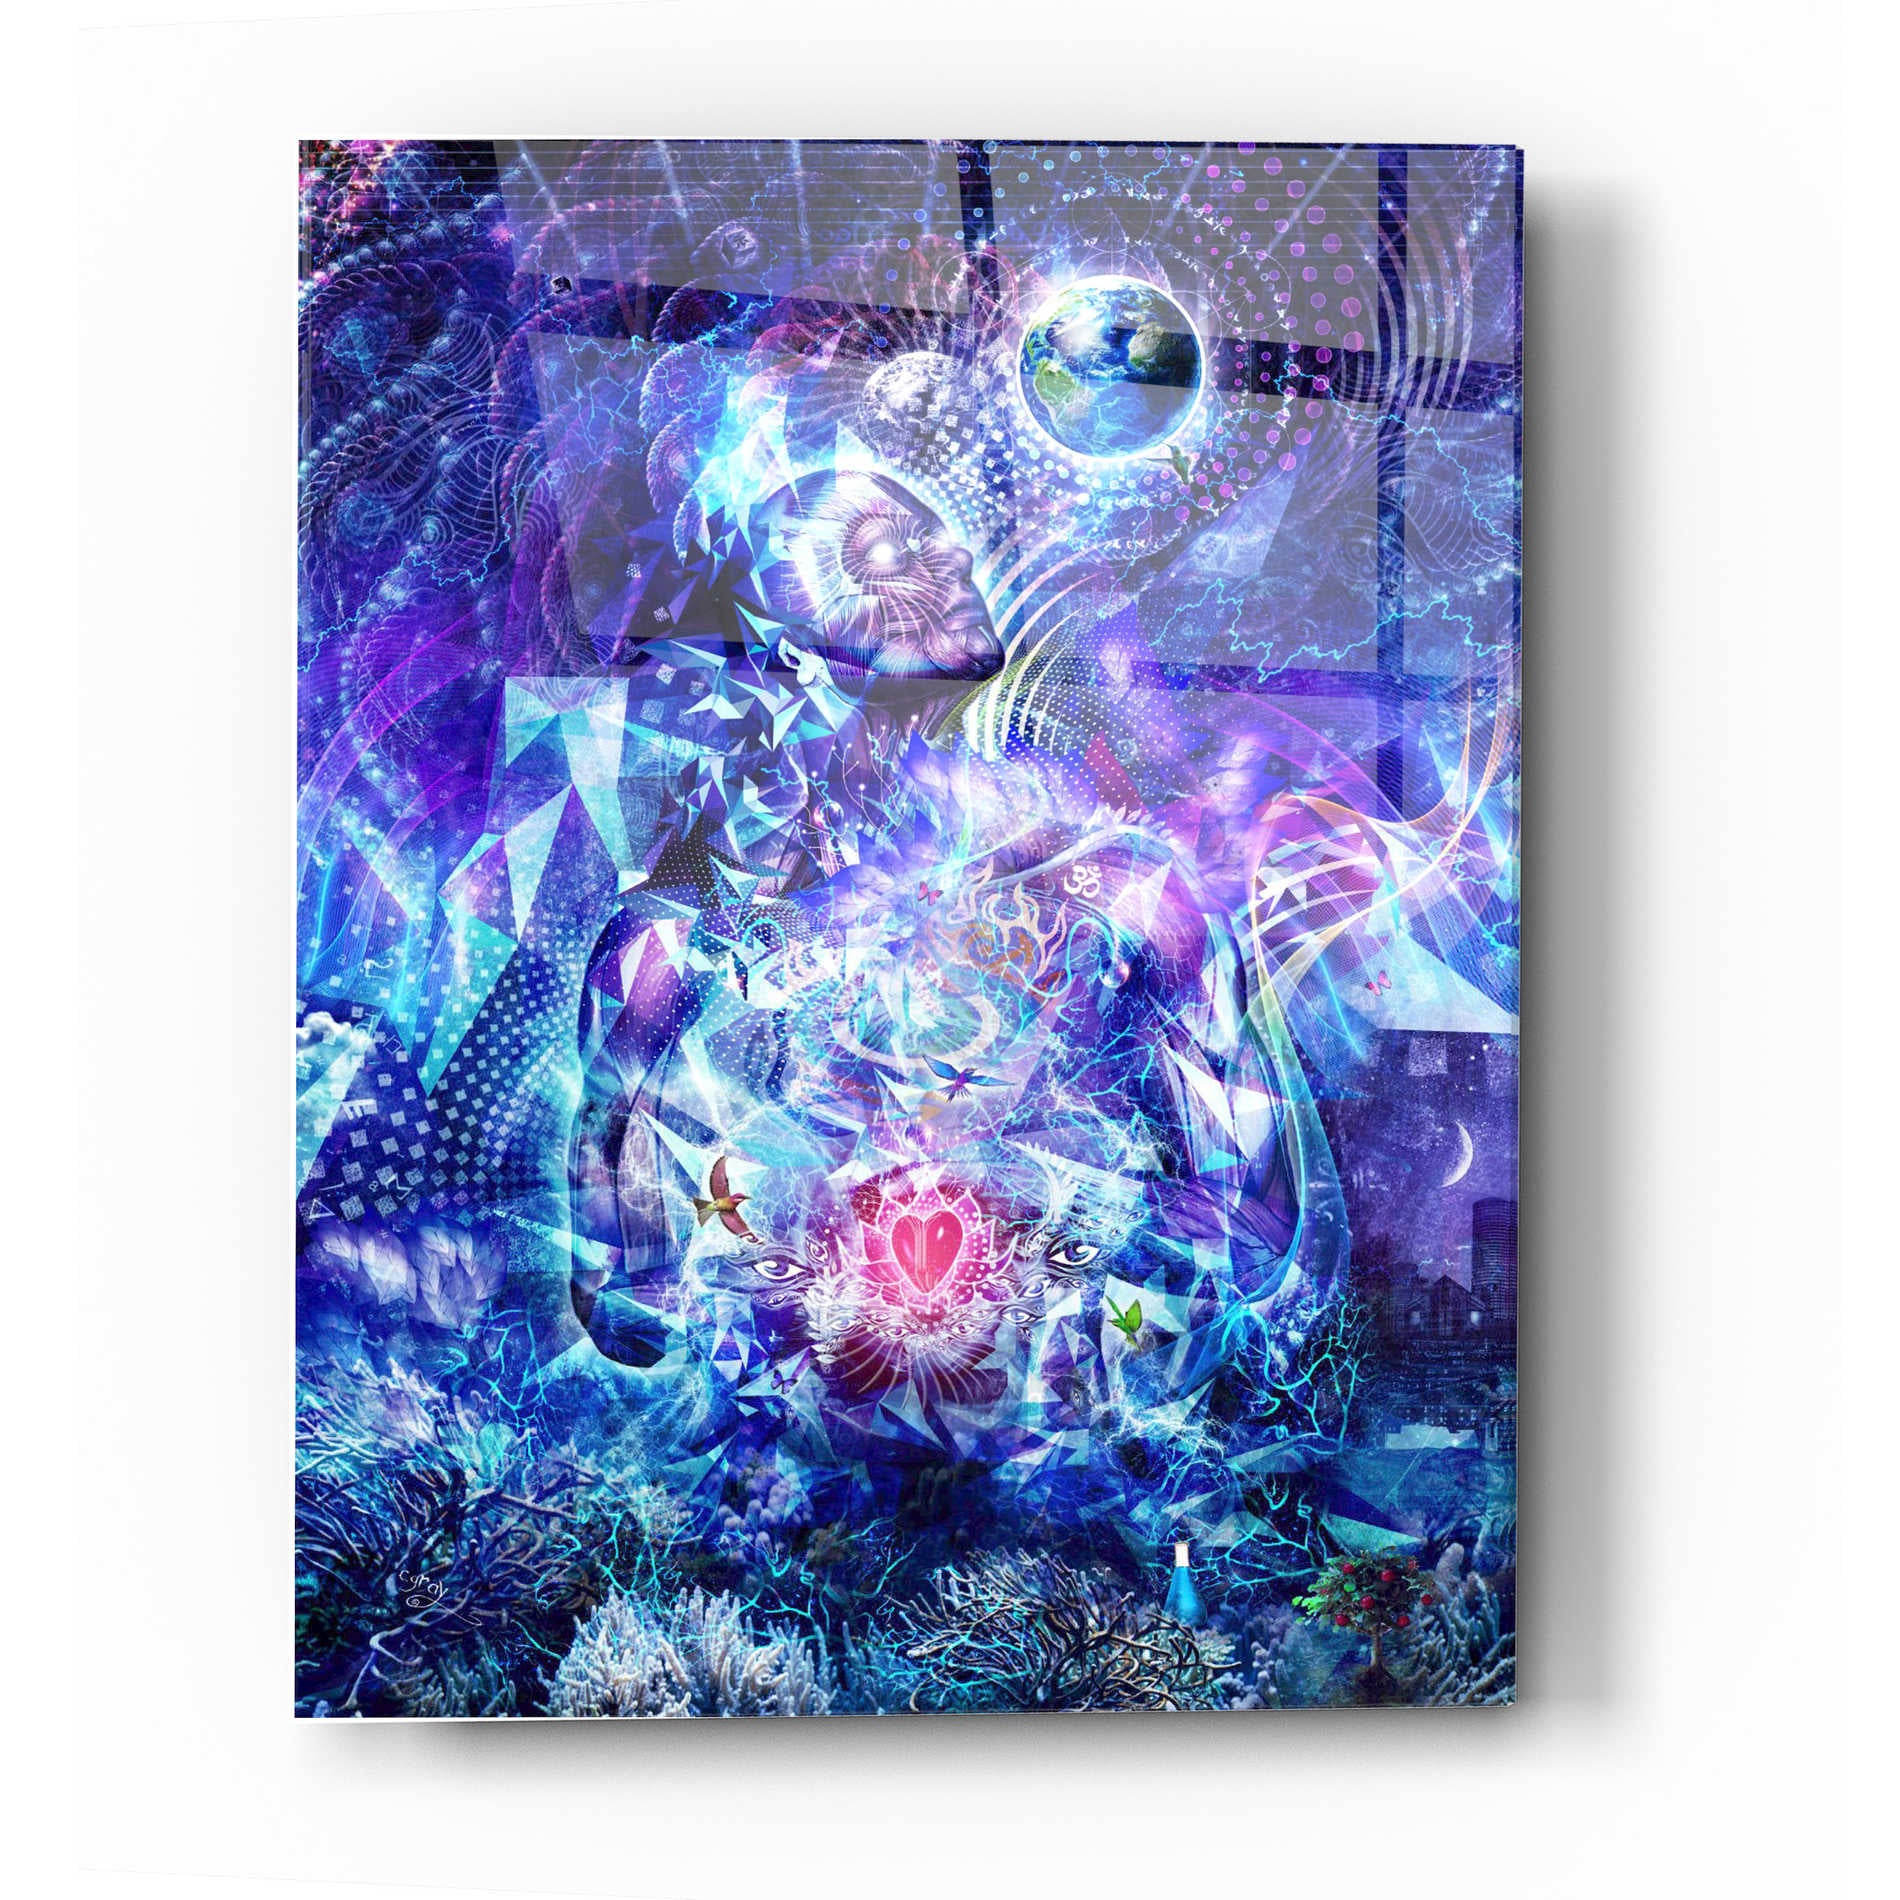 Epic Art 'Transcension Vertical' by Cameron Gray, Acrylic Glass Wall Art,12x16